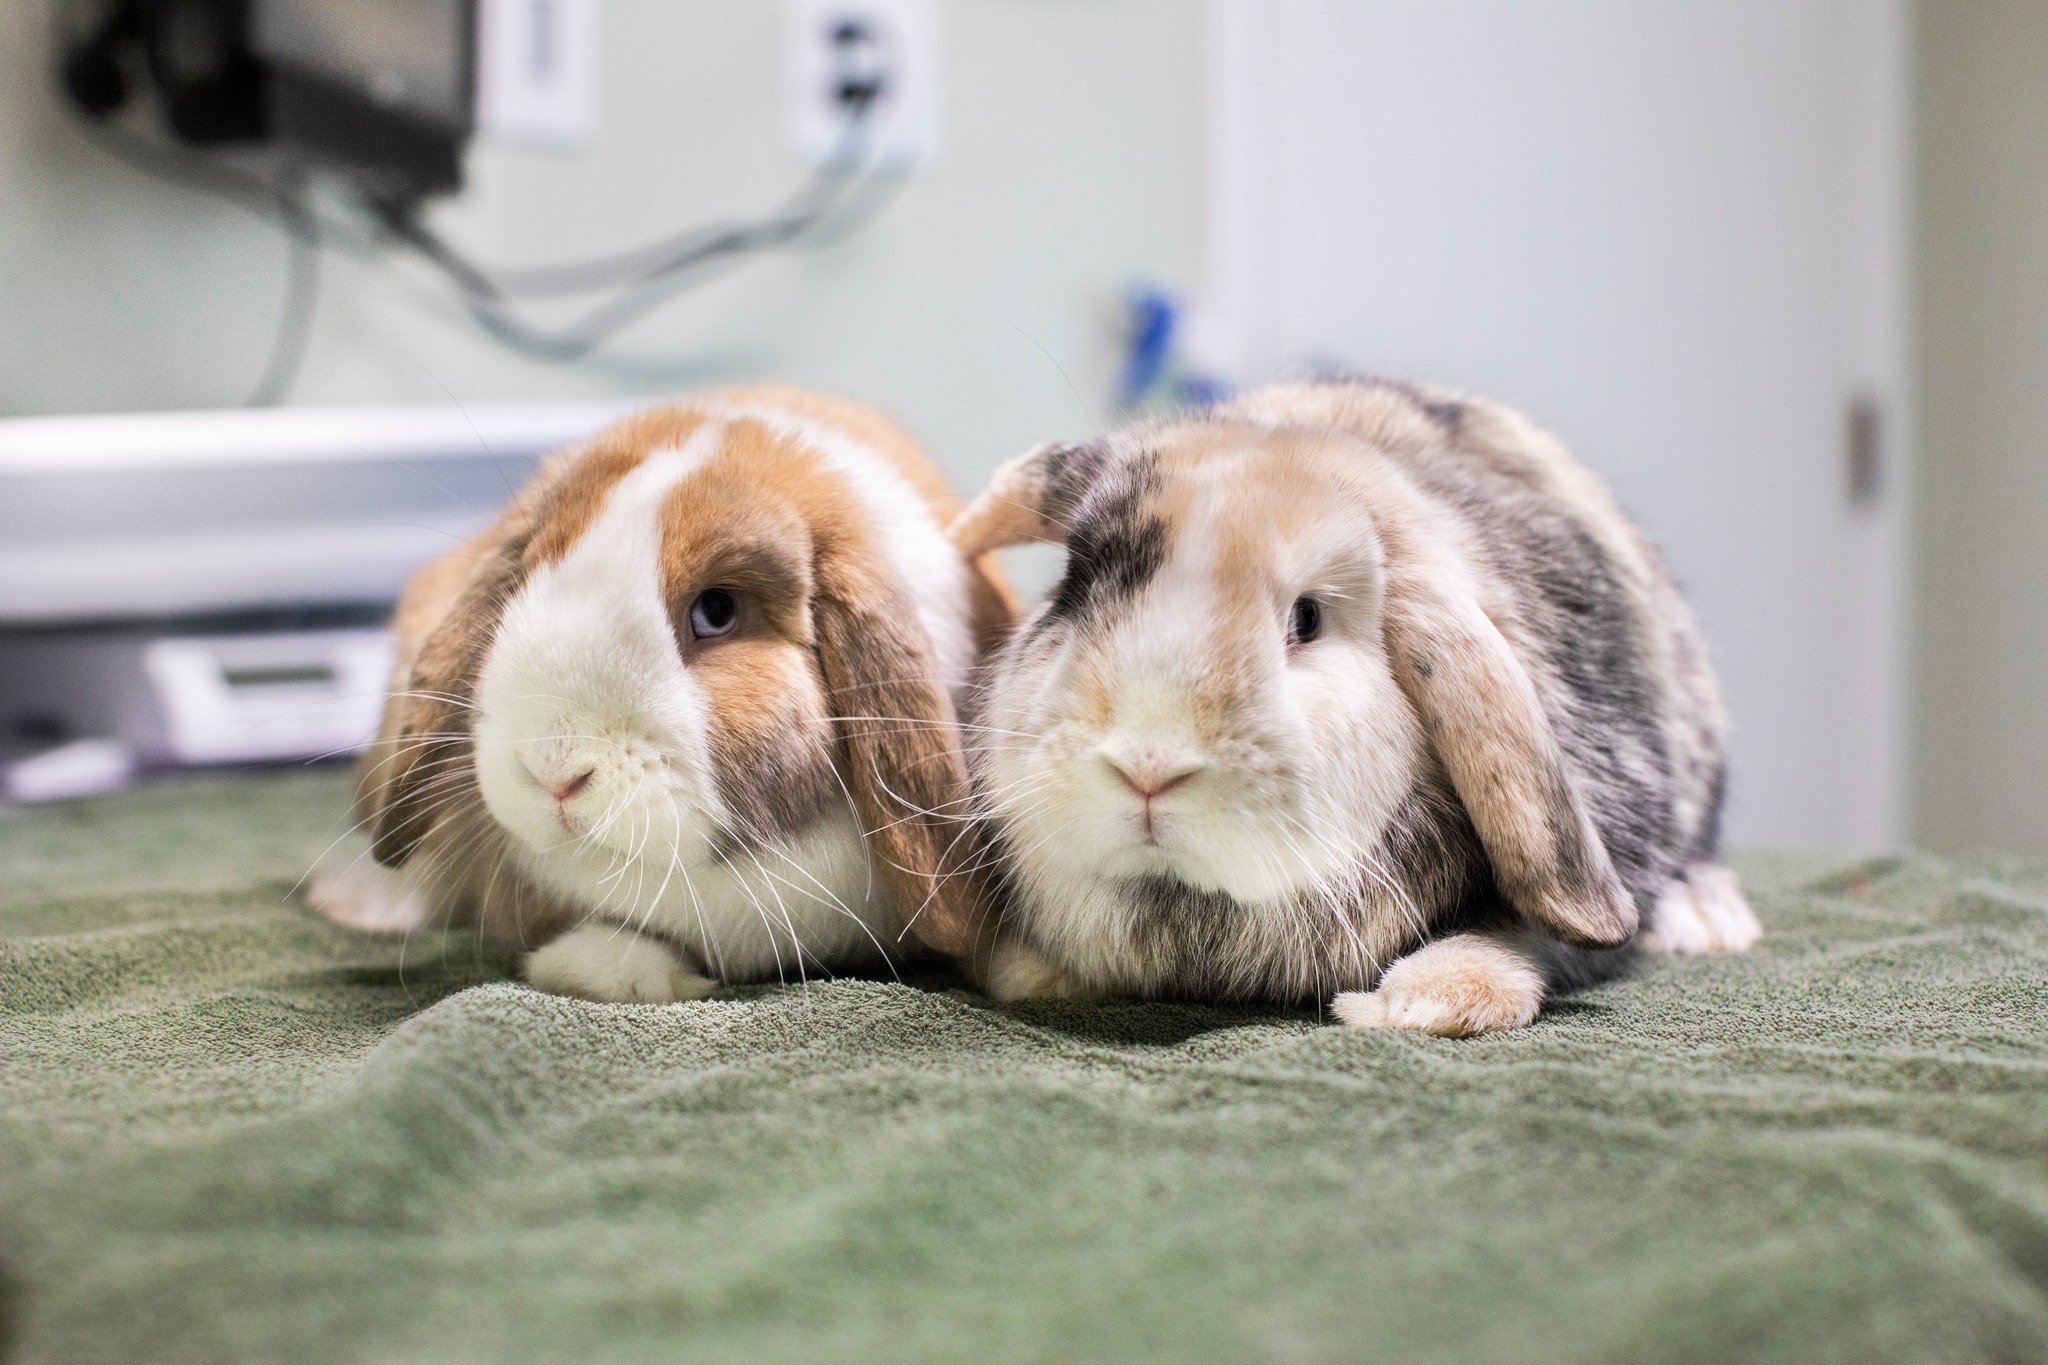 Barbie and Malibu recently stopped in for their wellness exams! 🐇

We recommend yearly wellness exams to catch any early signs of illness. For rabbits, these exams are a great opportunity to receive their first RHDV vaccine or get their yearly boost